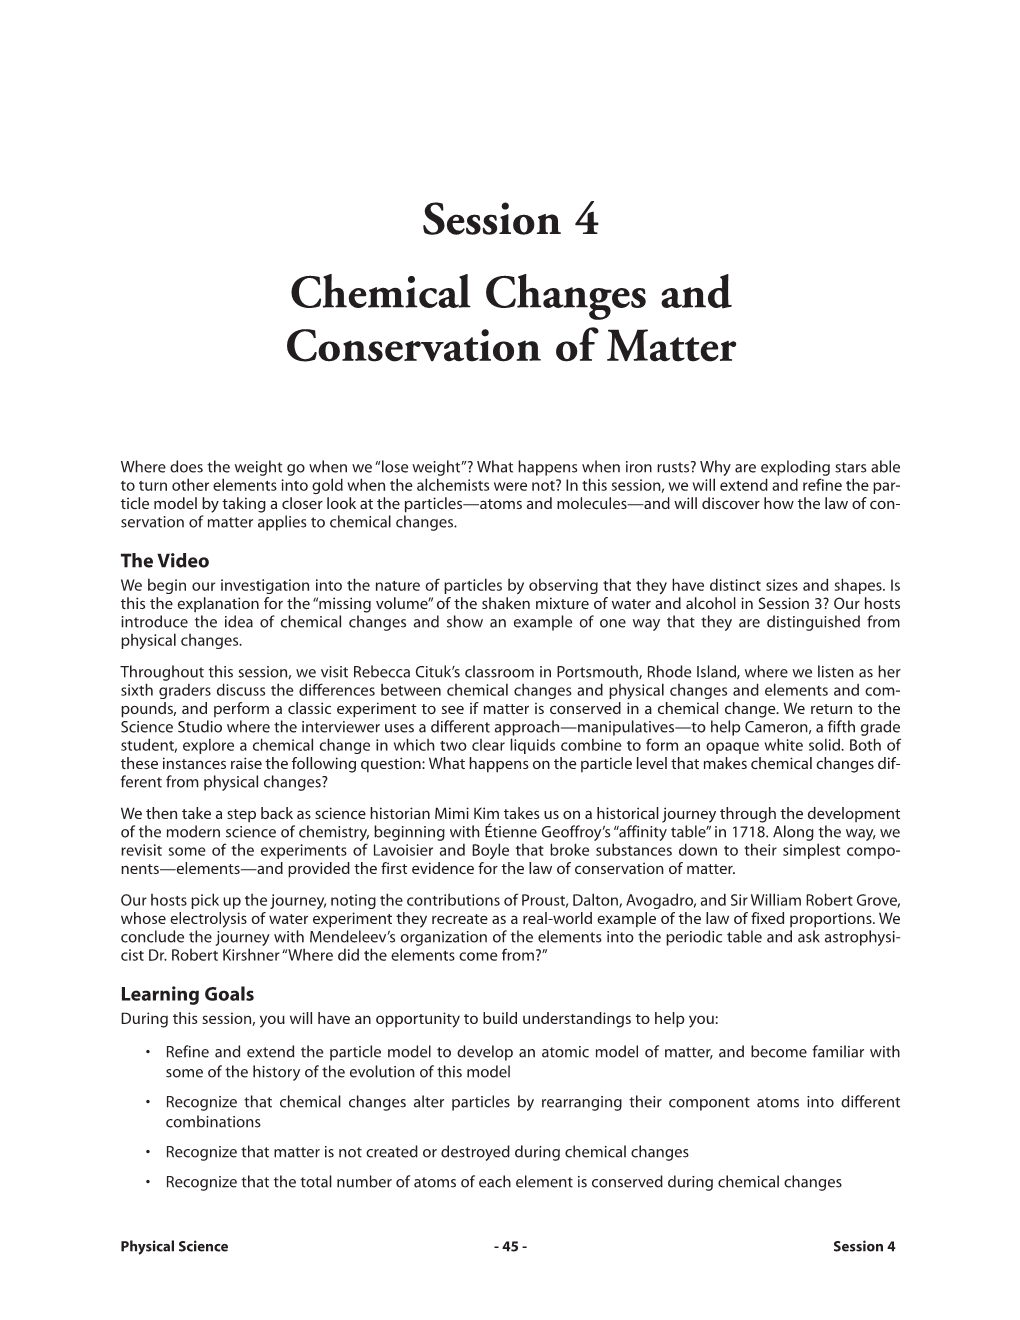 Session 4 Chemical Changes and Conservation of Matter